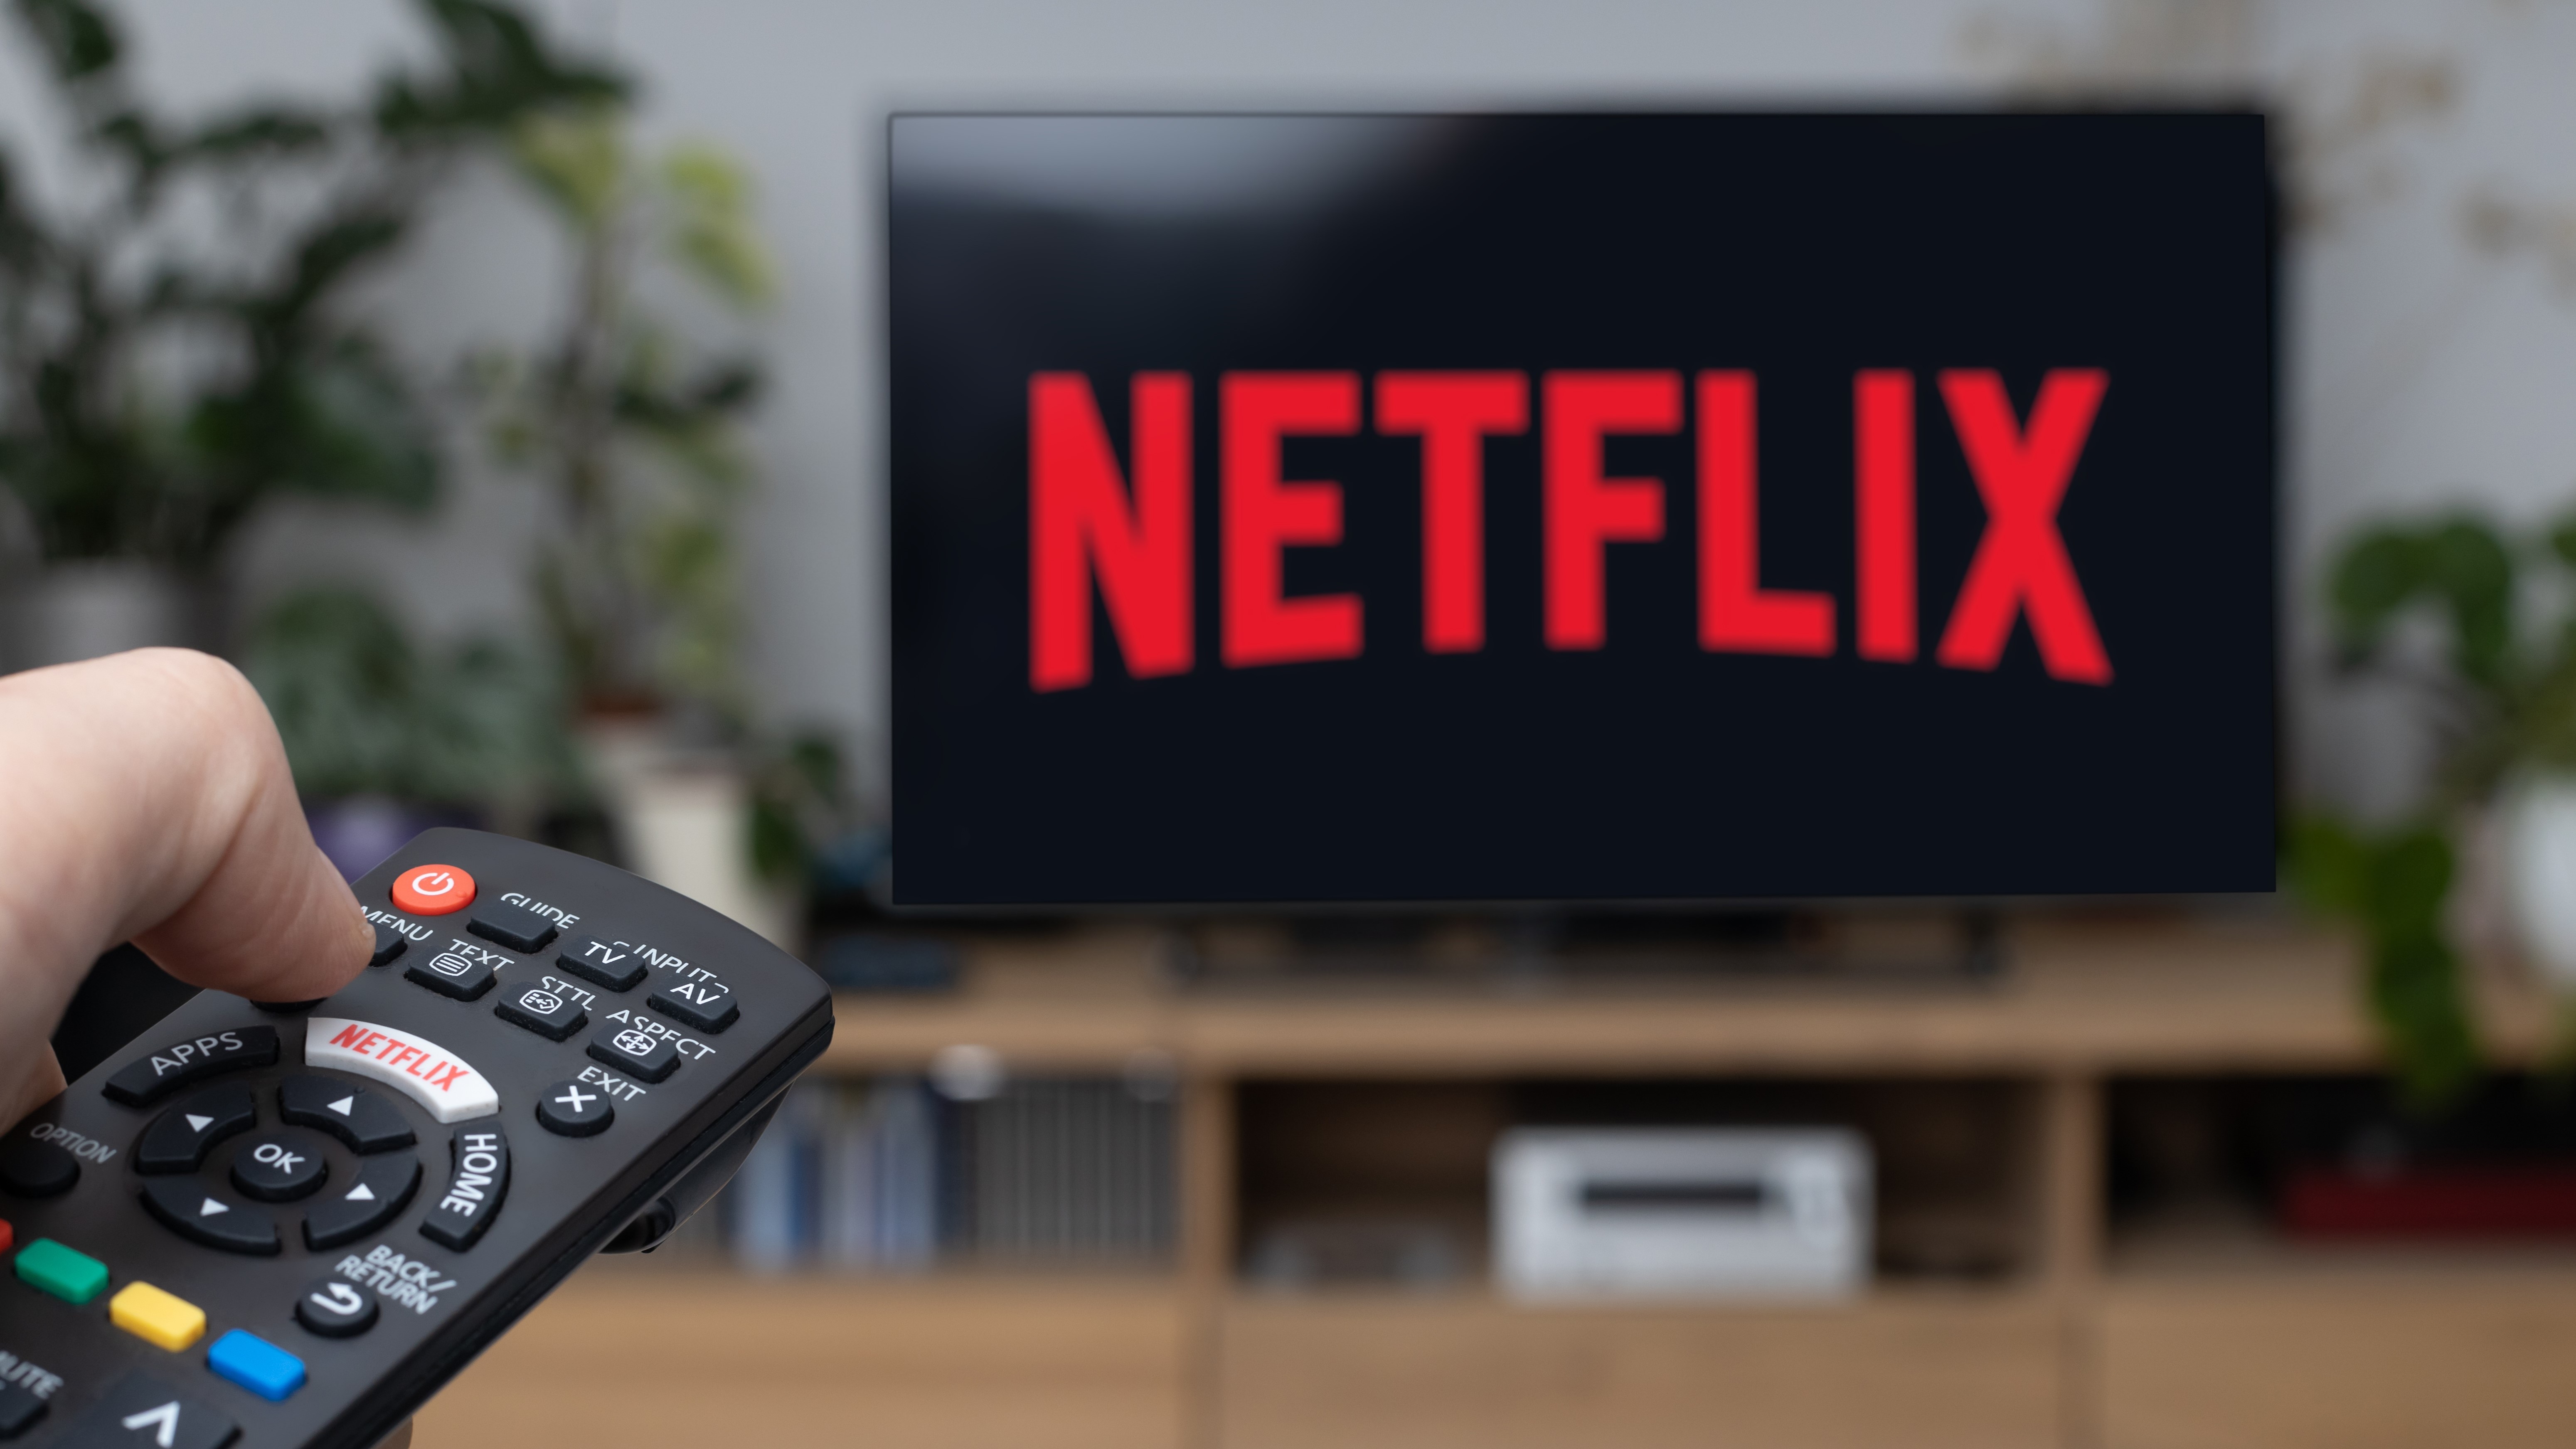 Netflix logo on TV screen with viewer holding remote control